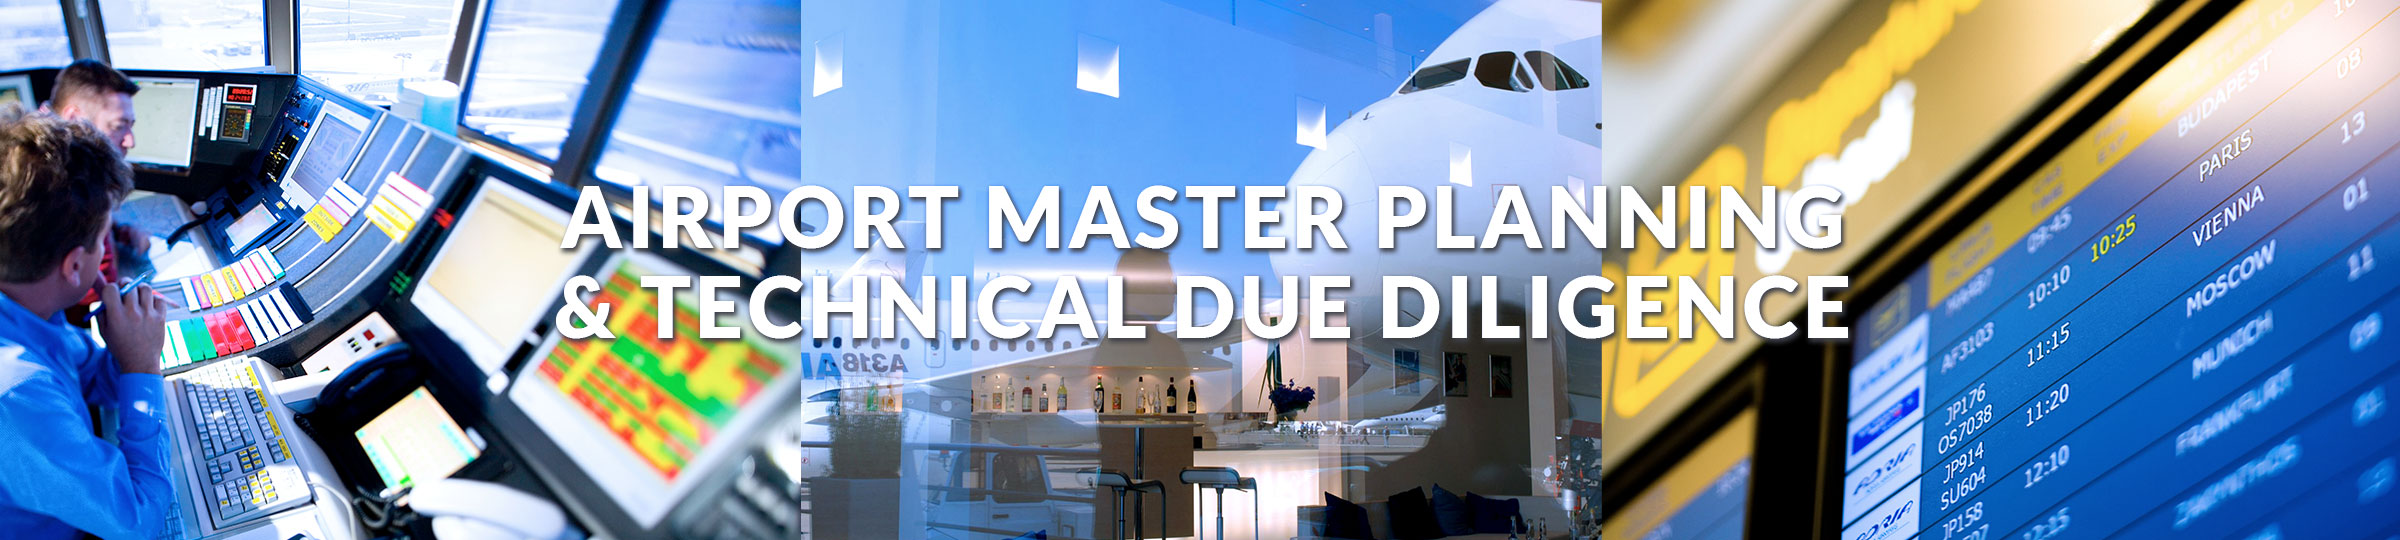 Airport Master Planning and Technical Due Diligence with CrissCross International